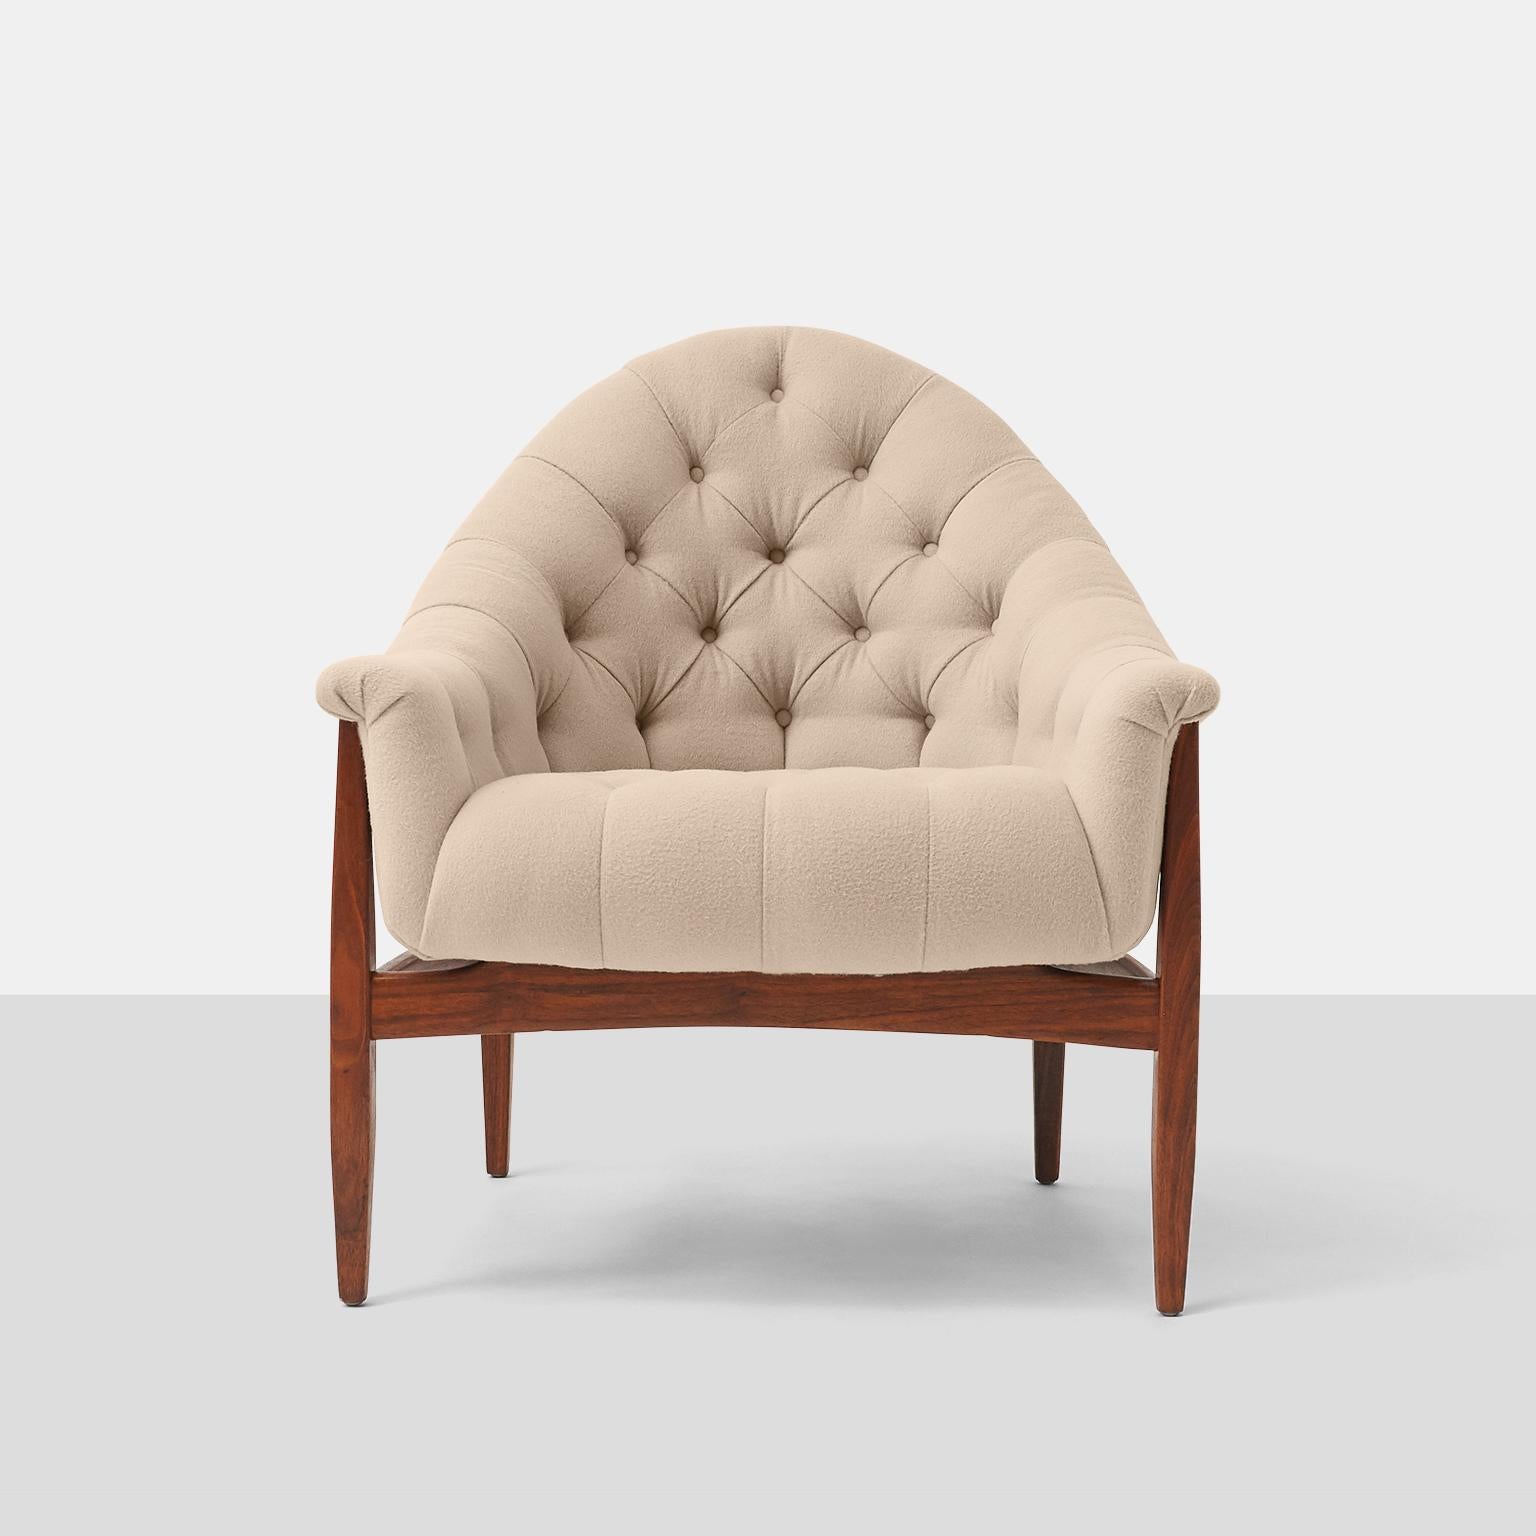 Modern Tufted Chairs by Milo Baughman